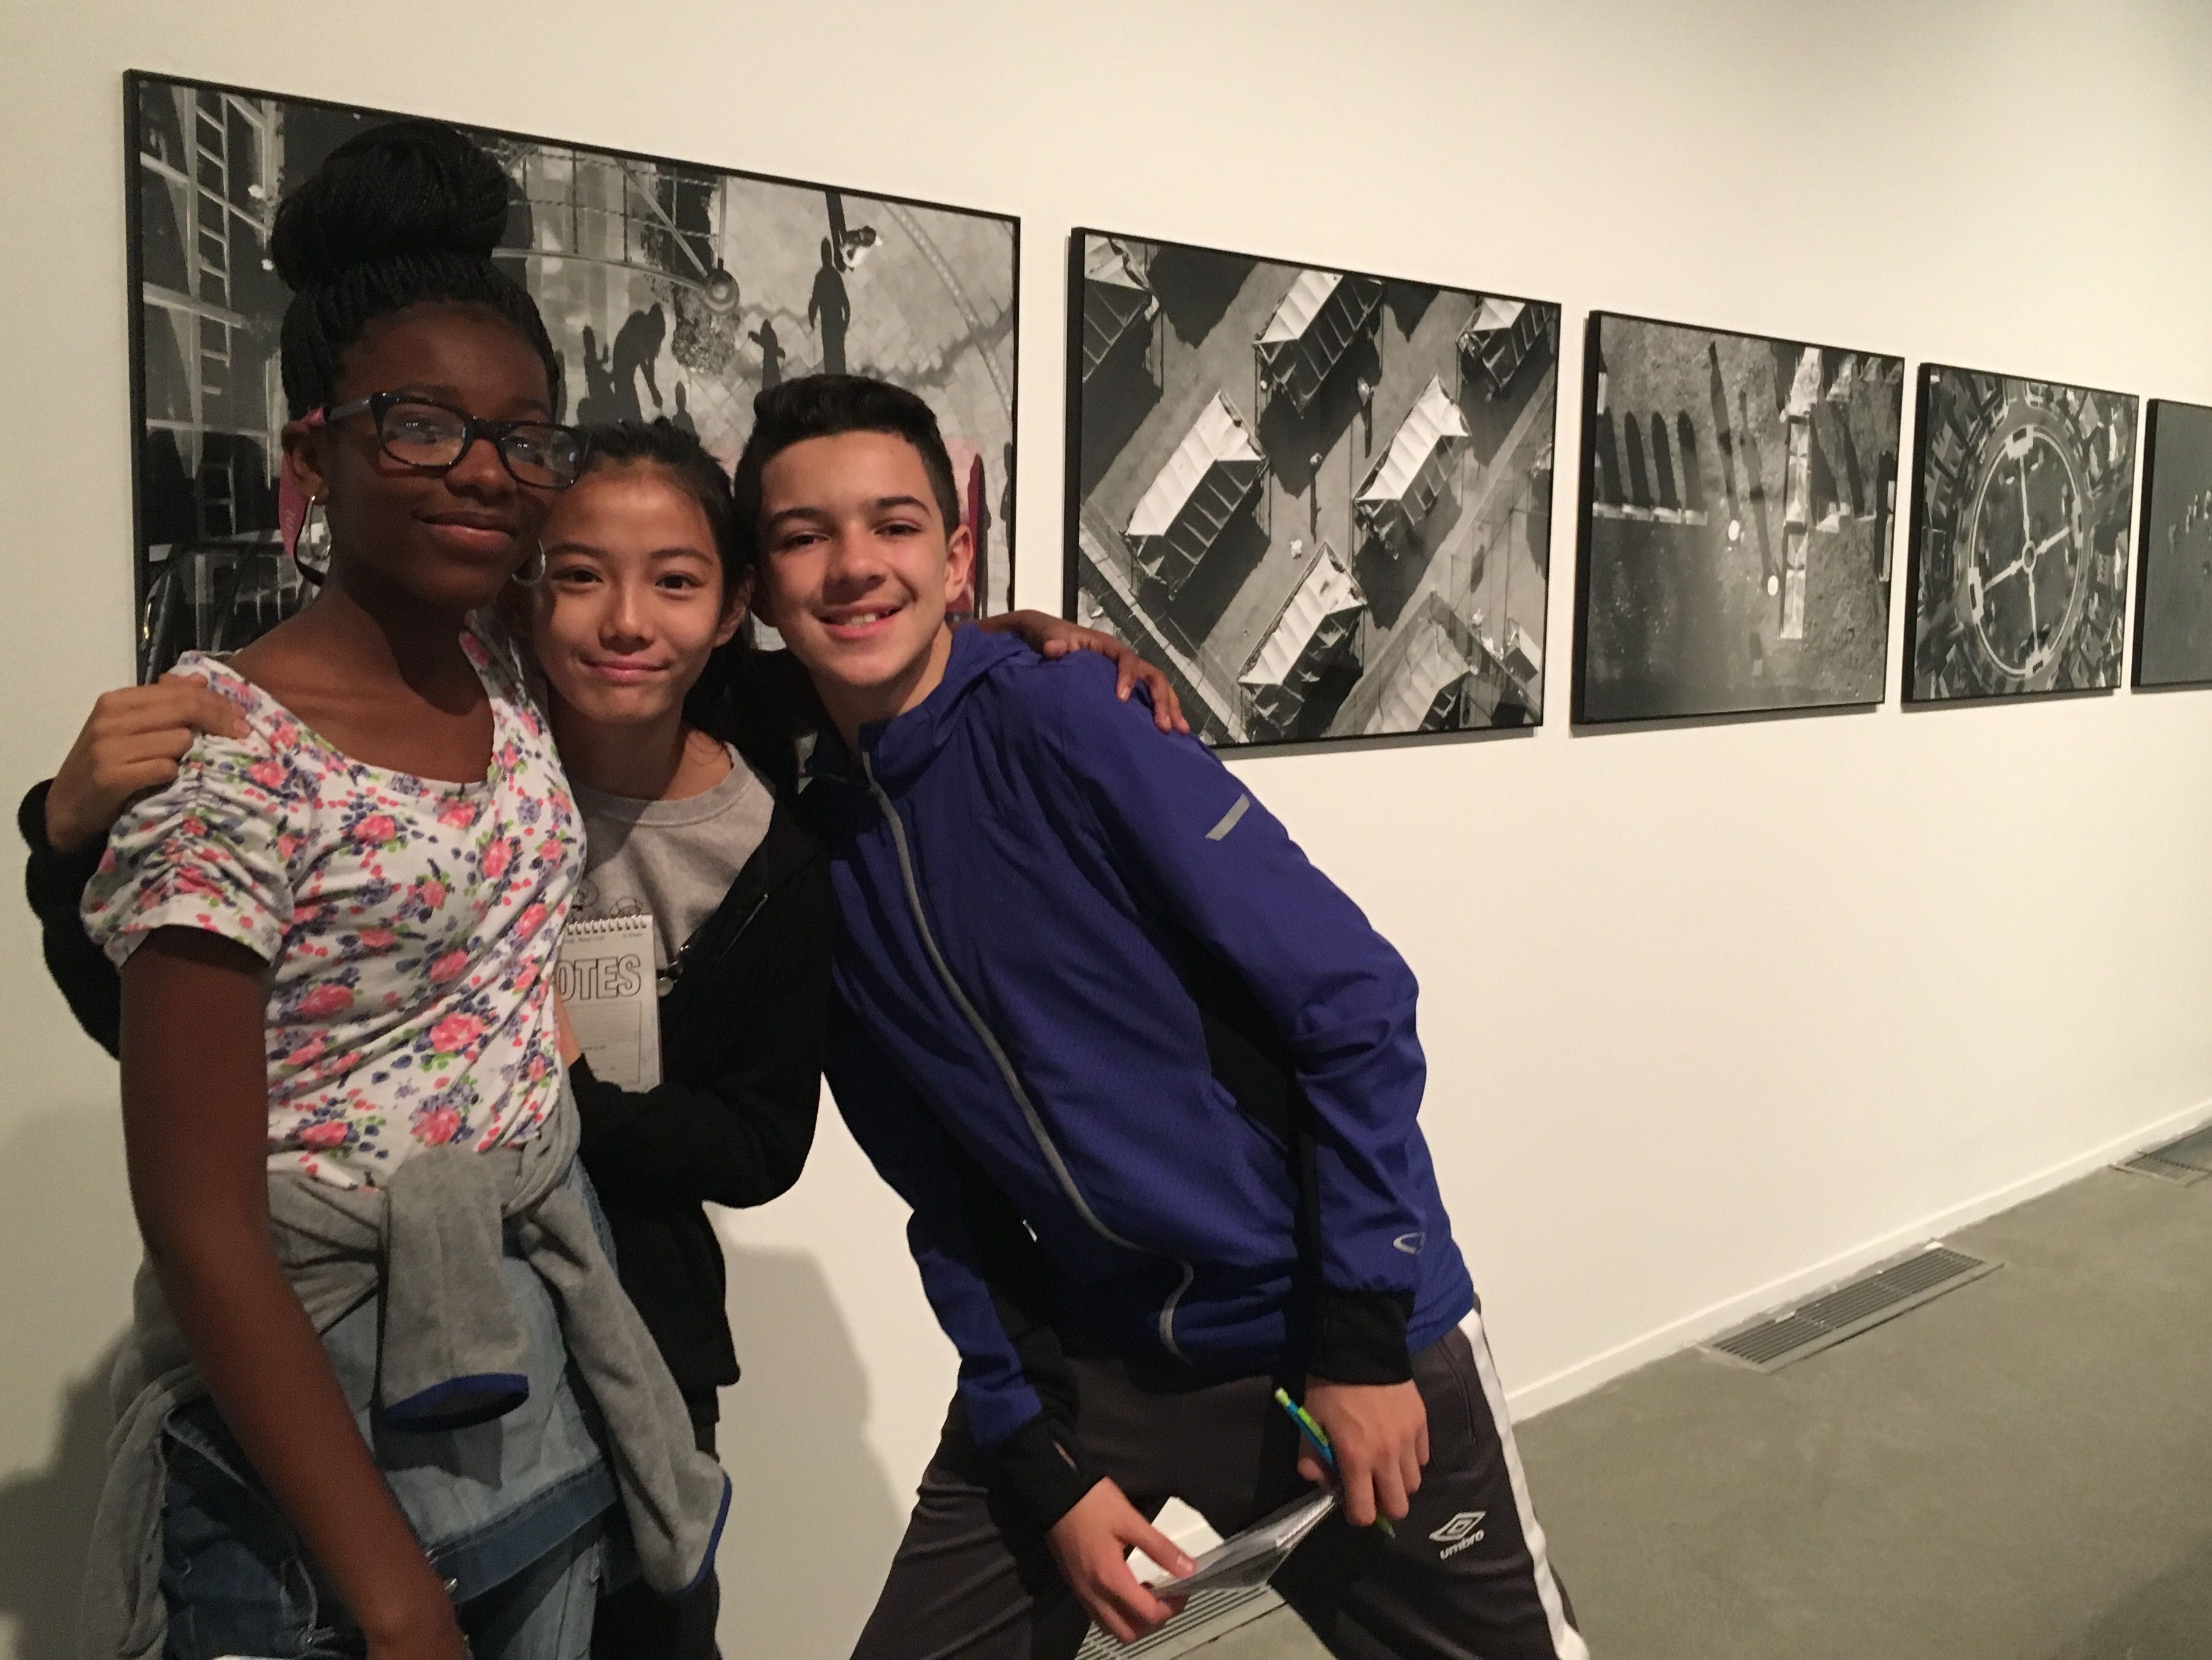 Students pose with photos taken by Tomas van Houtryve in the "Dispatches" exhibition. Image by Diana Greene. United States, 2016.